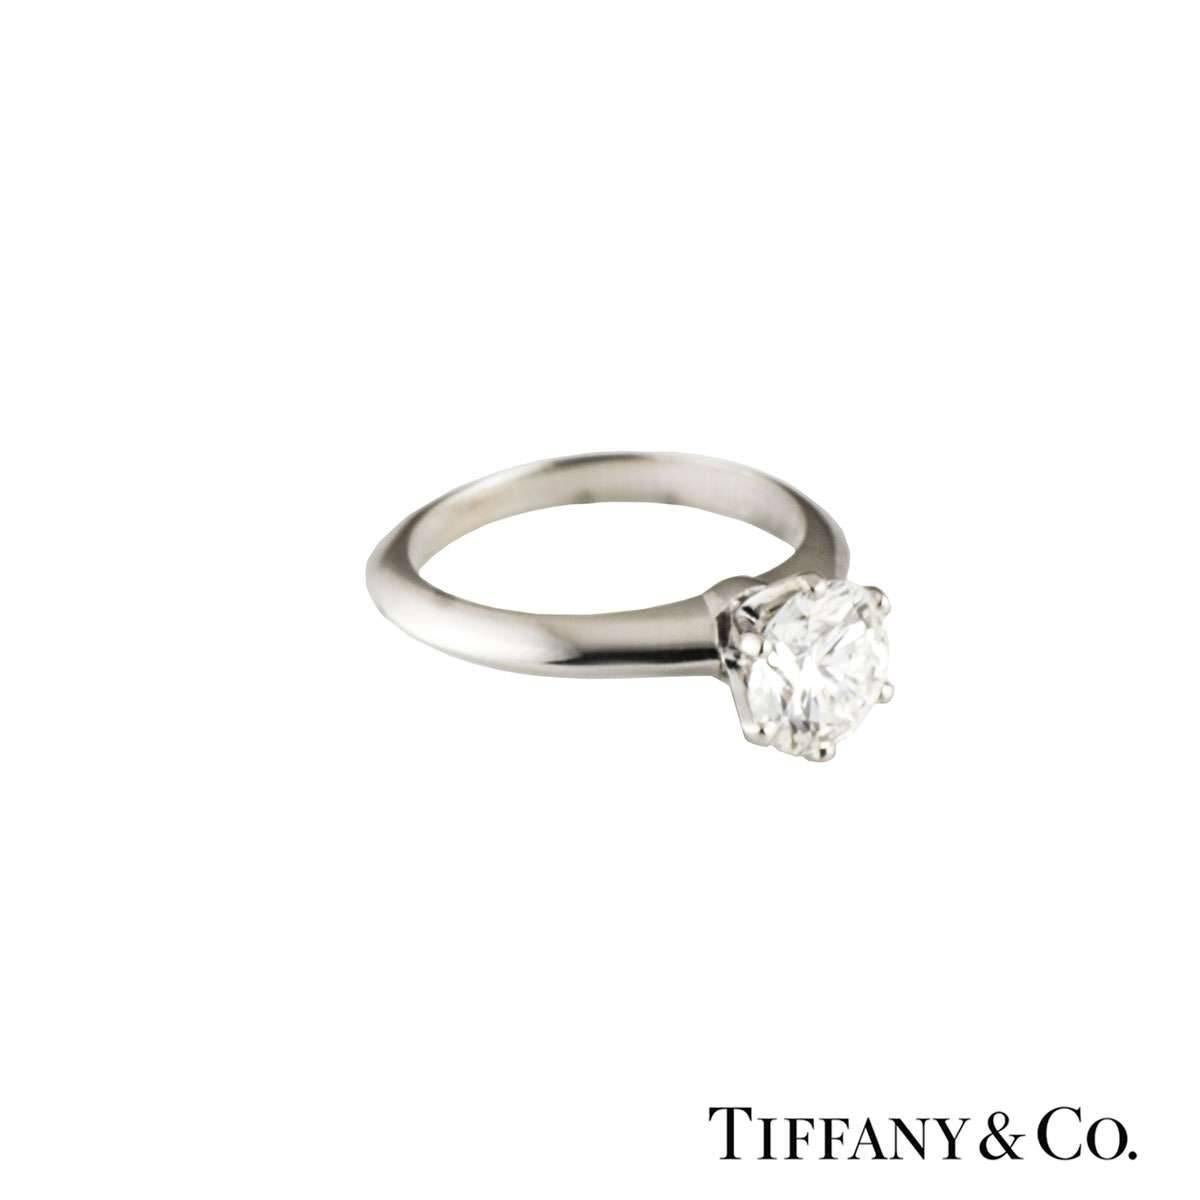 Round Cut Tiffany & Co. Round Diamond Solitaire Engagement Ring 1.05 Carat GIA Certified